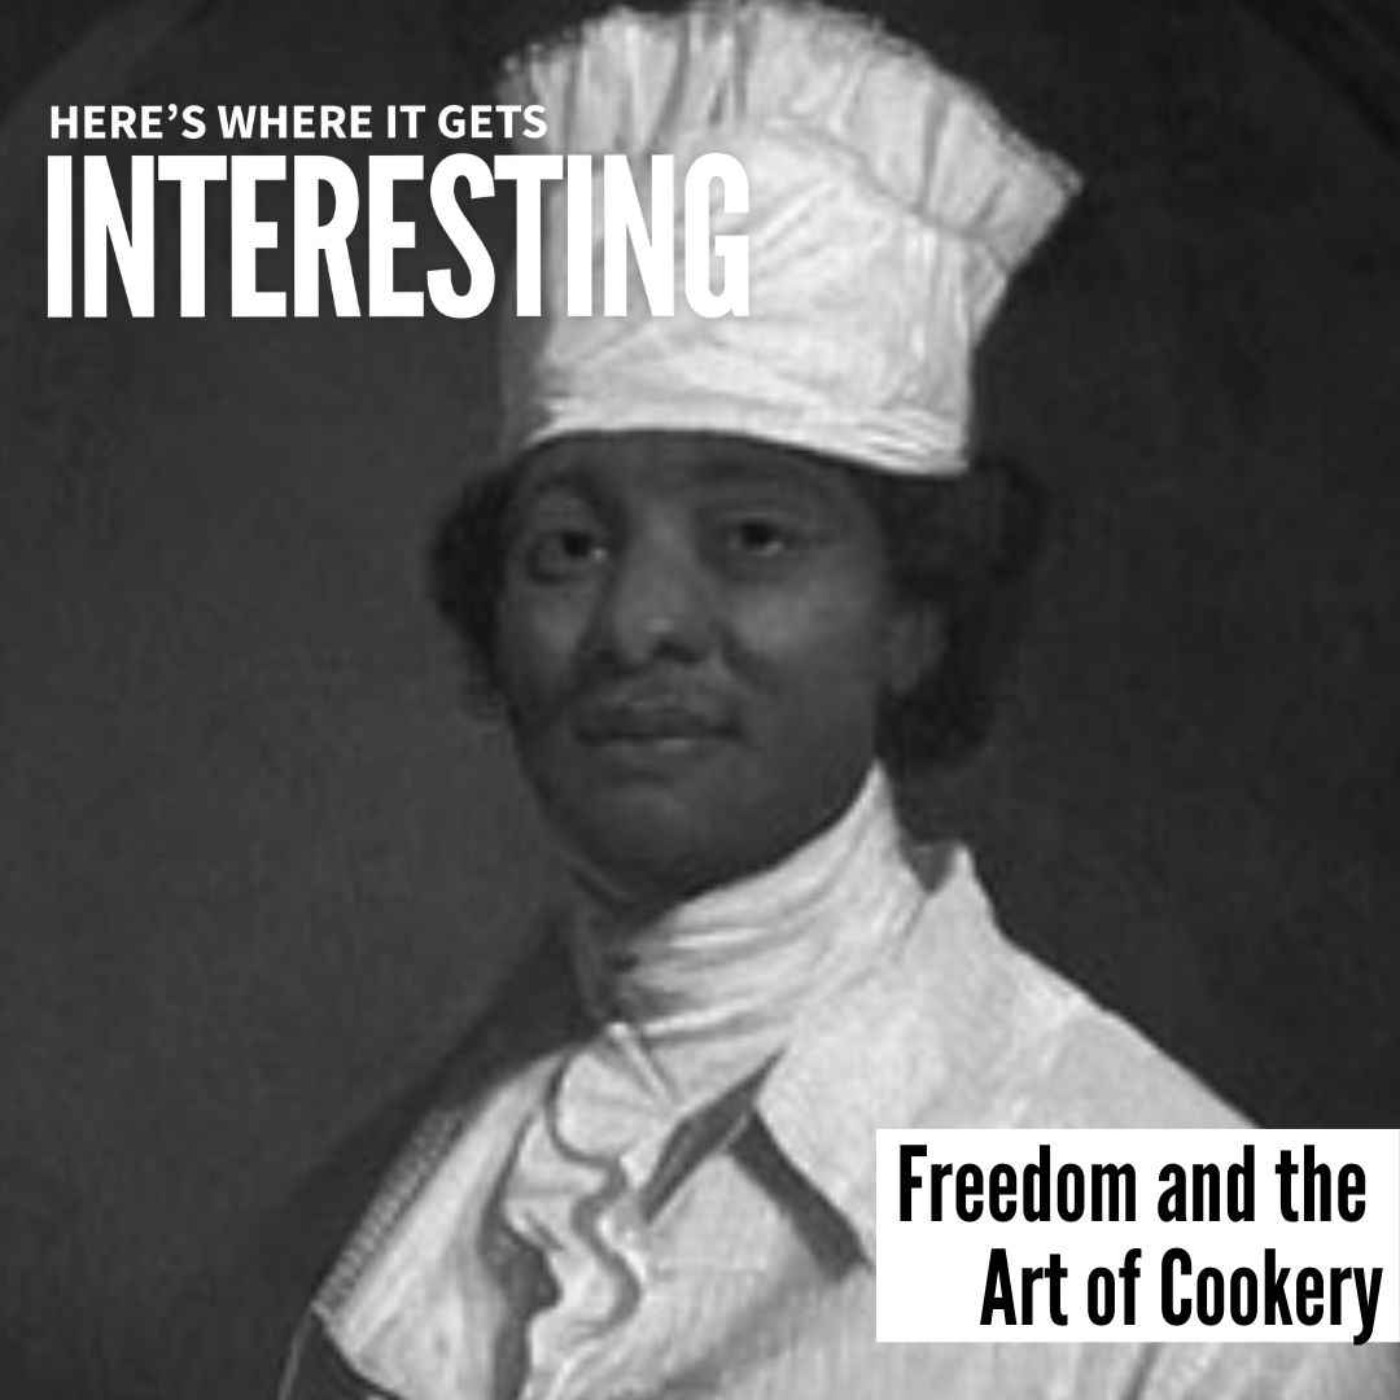 Freedom and the Art of Cookery